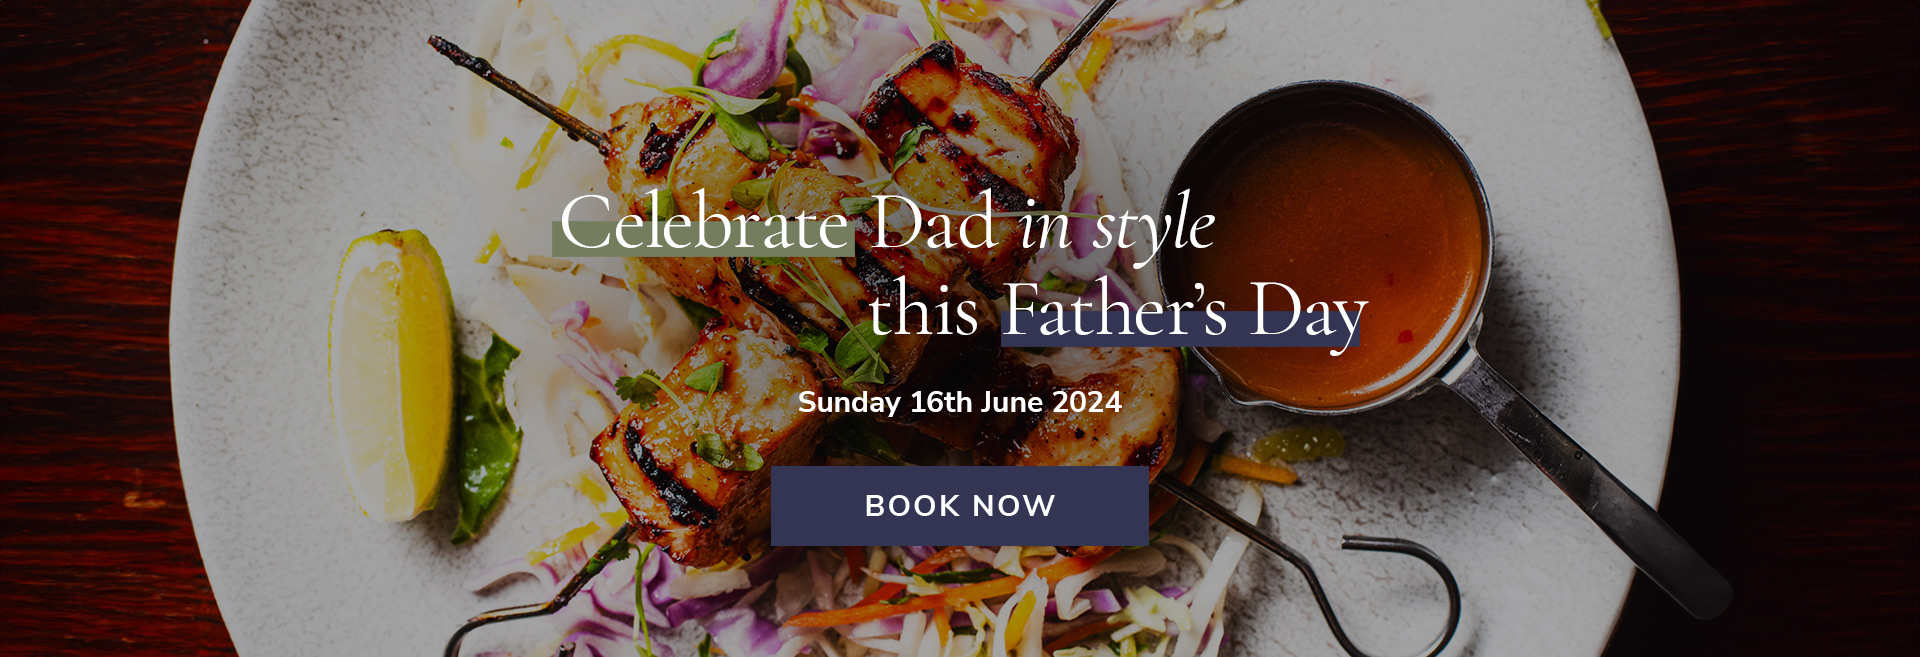 Father's Day at The Engineer